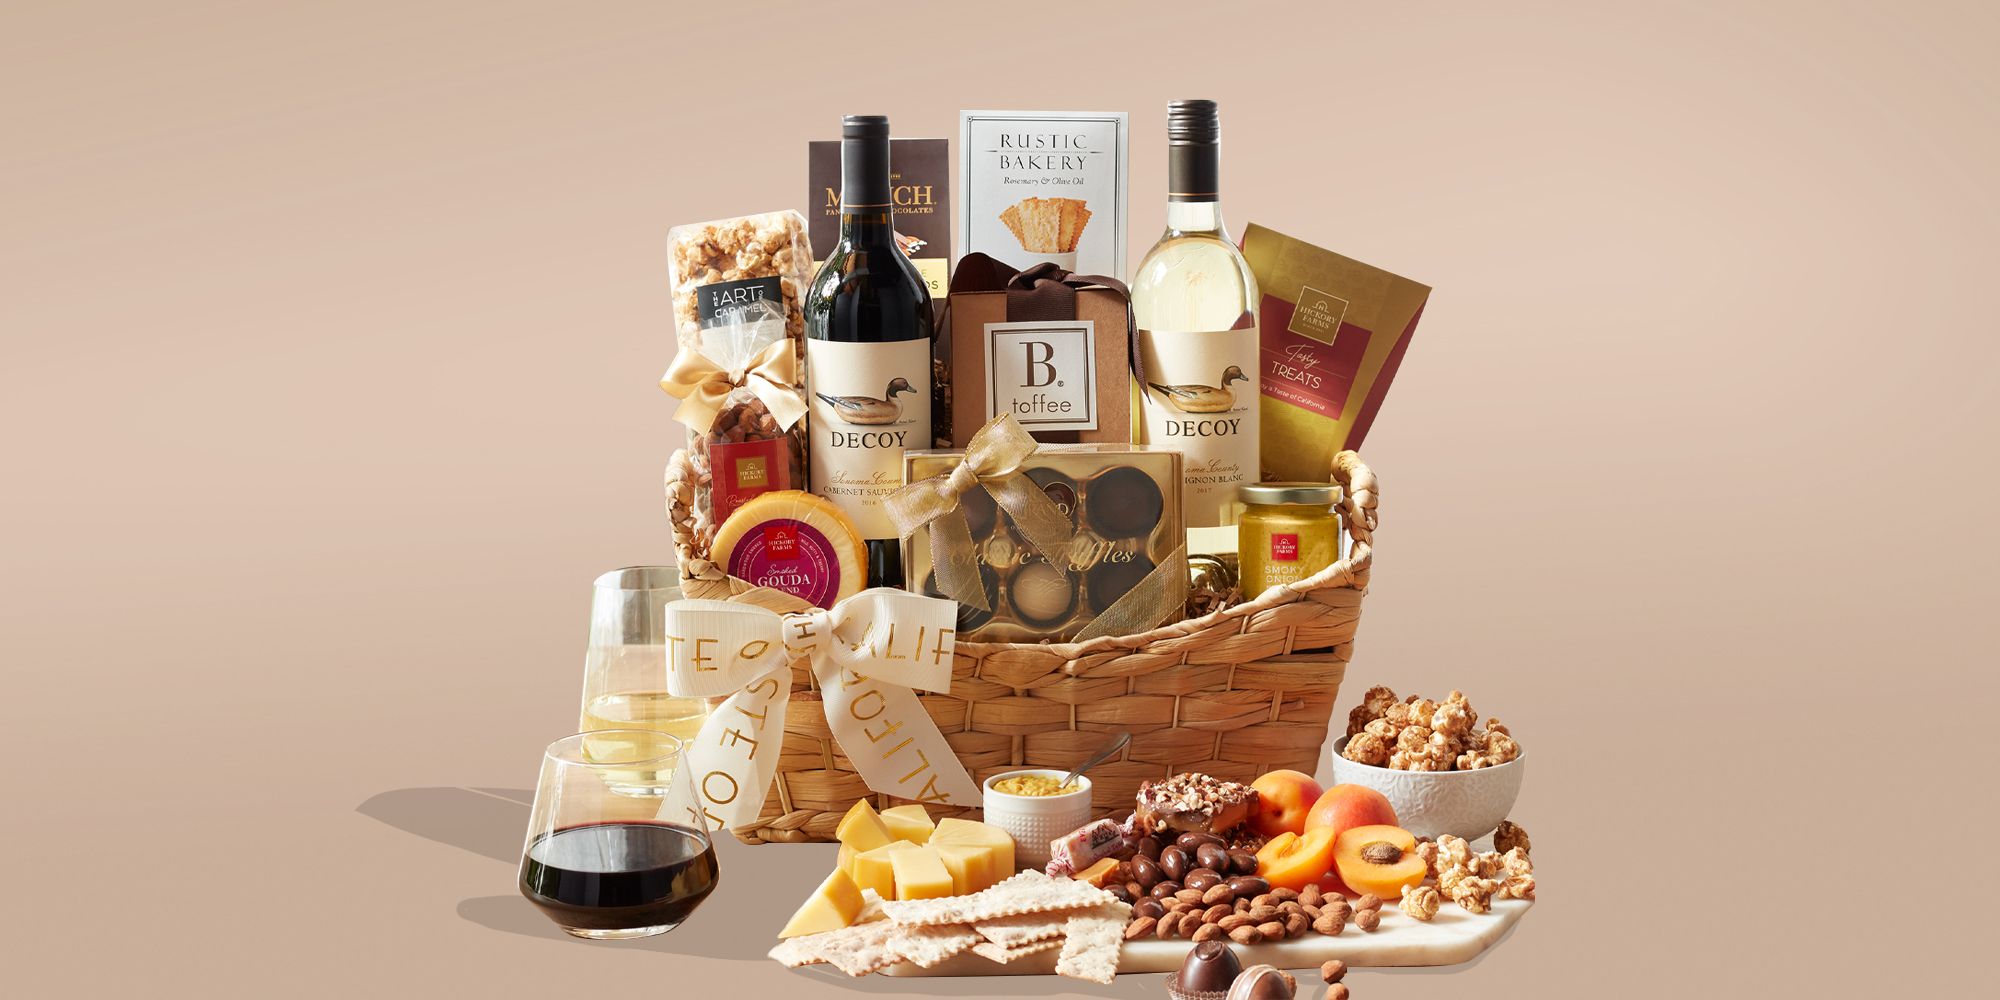 Adelaide’s Finest Wine and Cheese Hampers: A Gourmet’s Guide